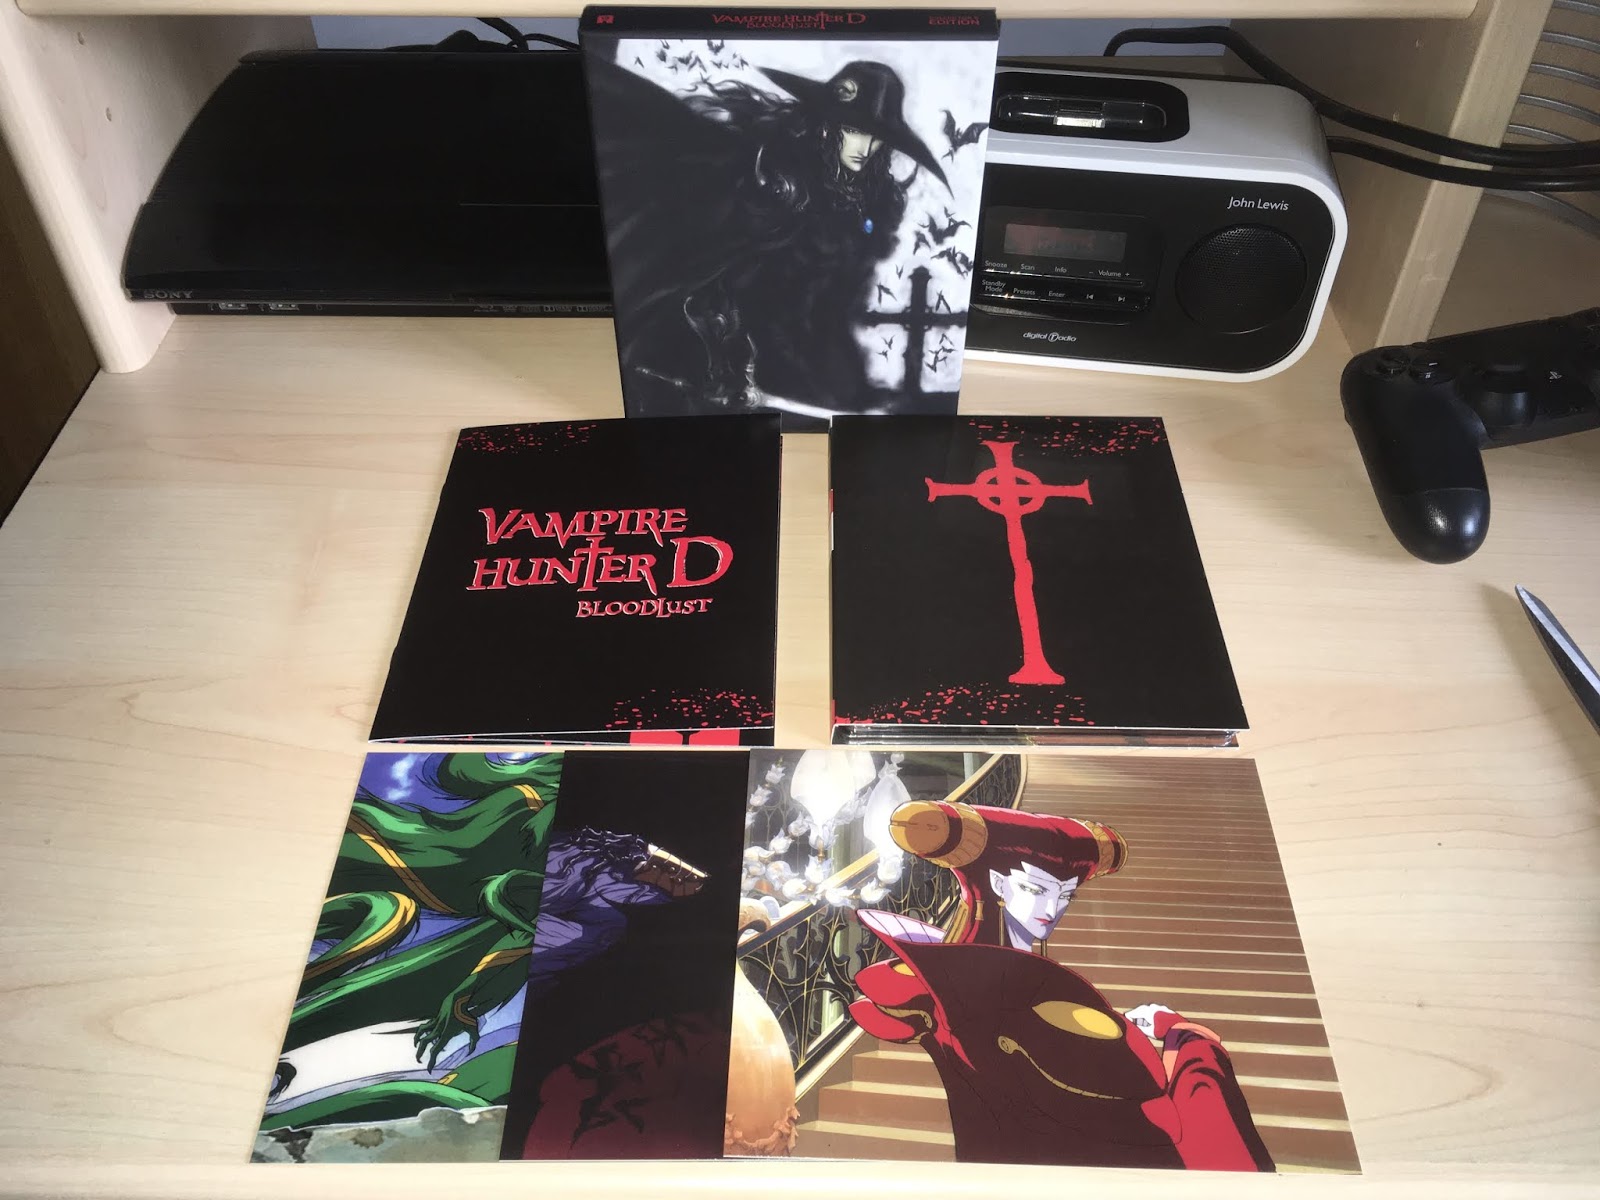 Petition · Petition to have Discotek Media bring Vampire Hunter D:  Bloodlust's Original Japanese Dub to their DVD/Blu-Ray Release. ·